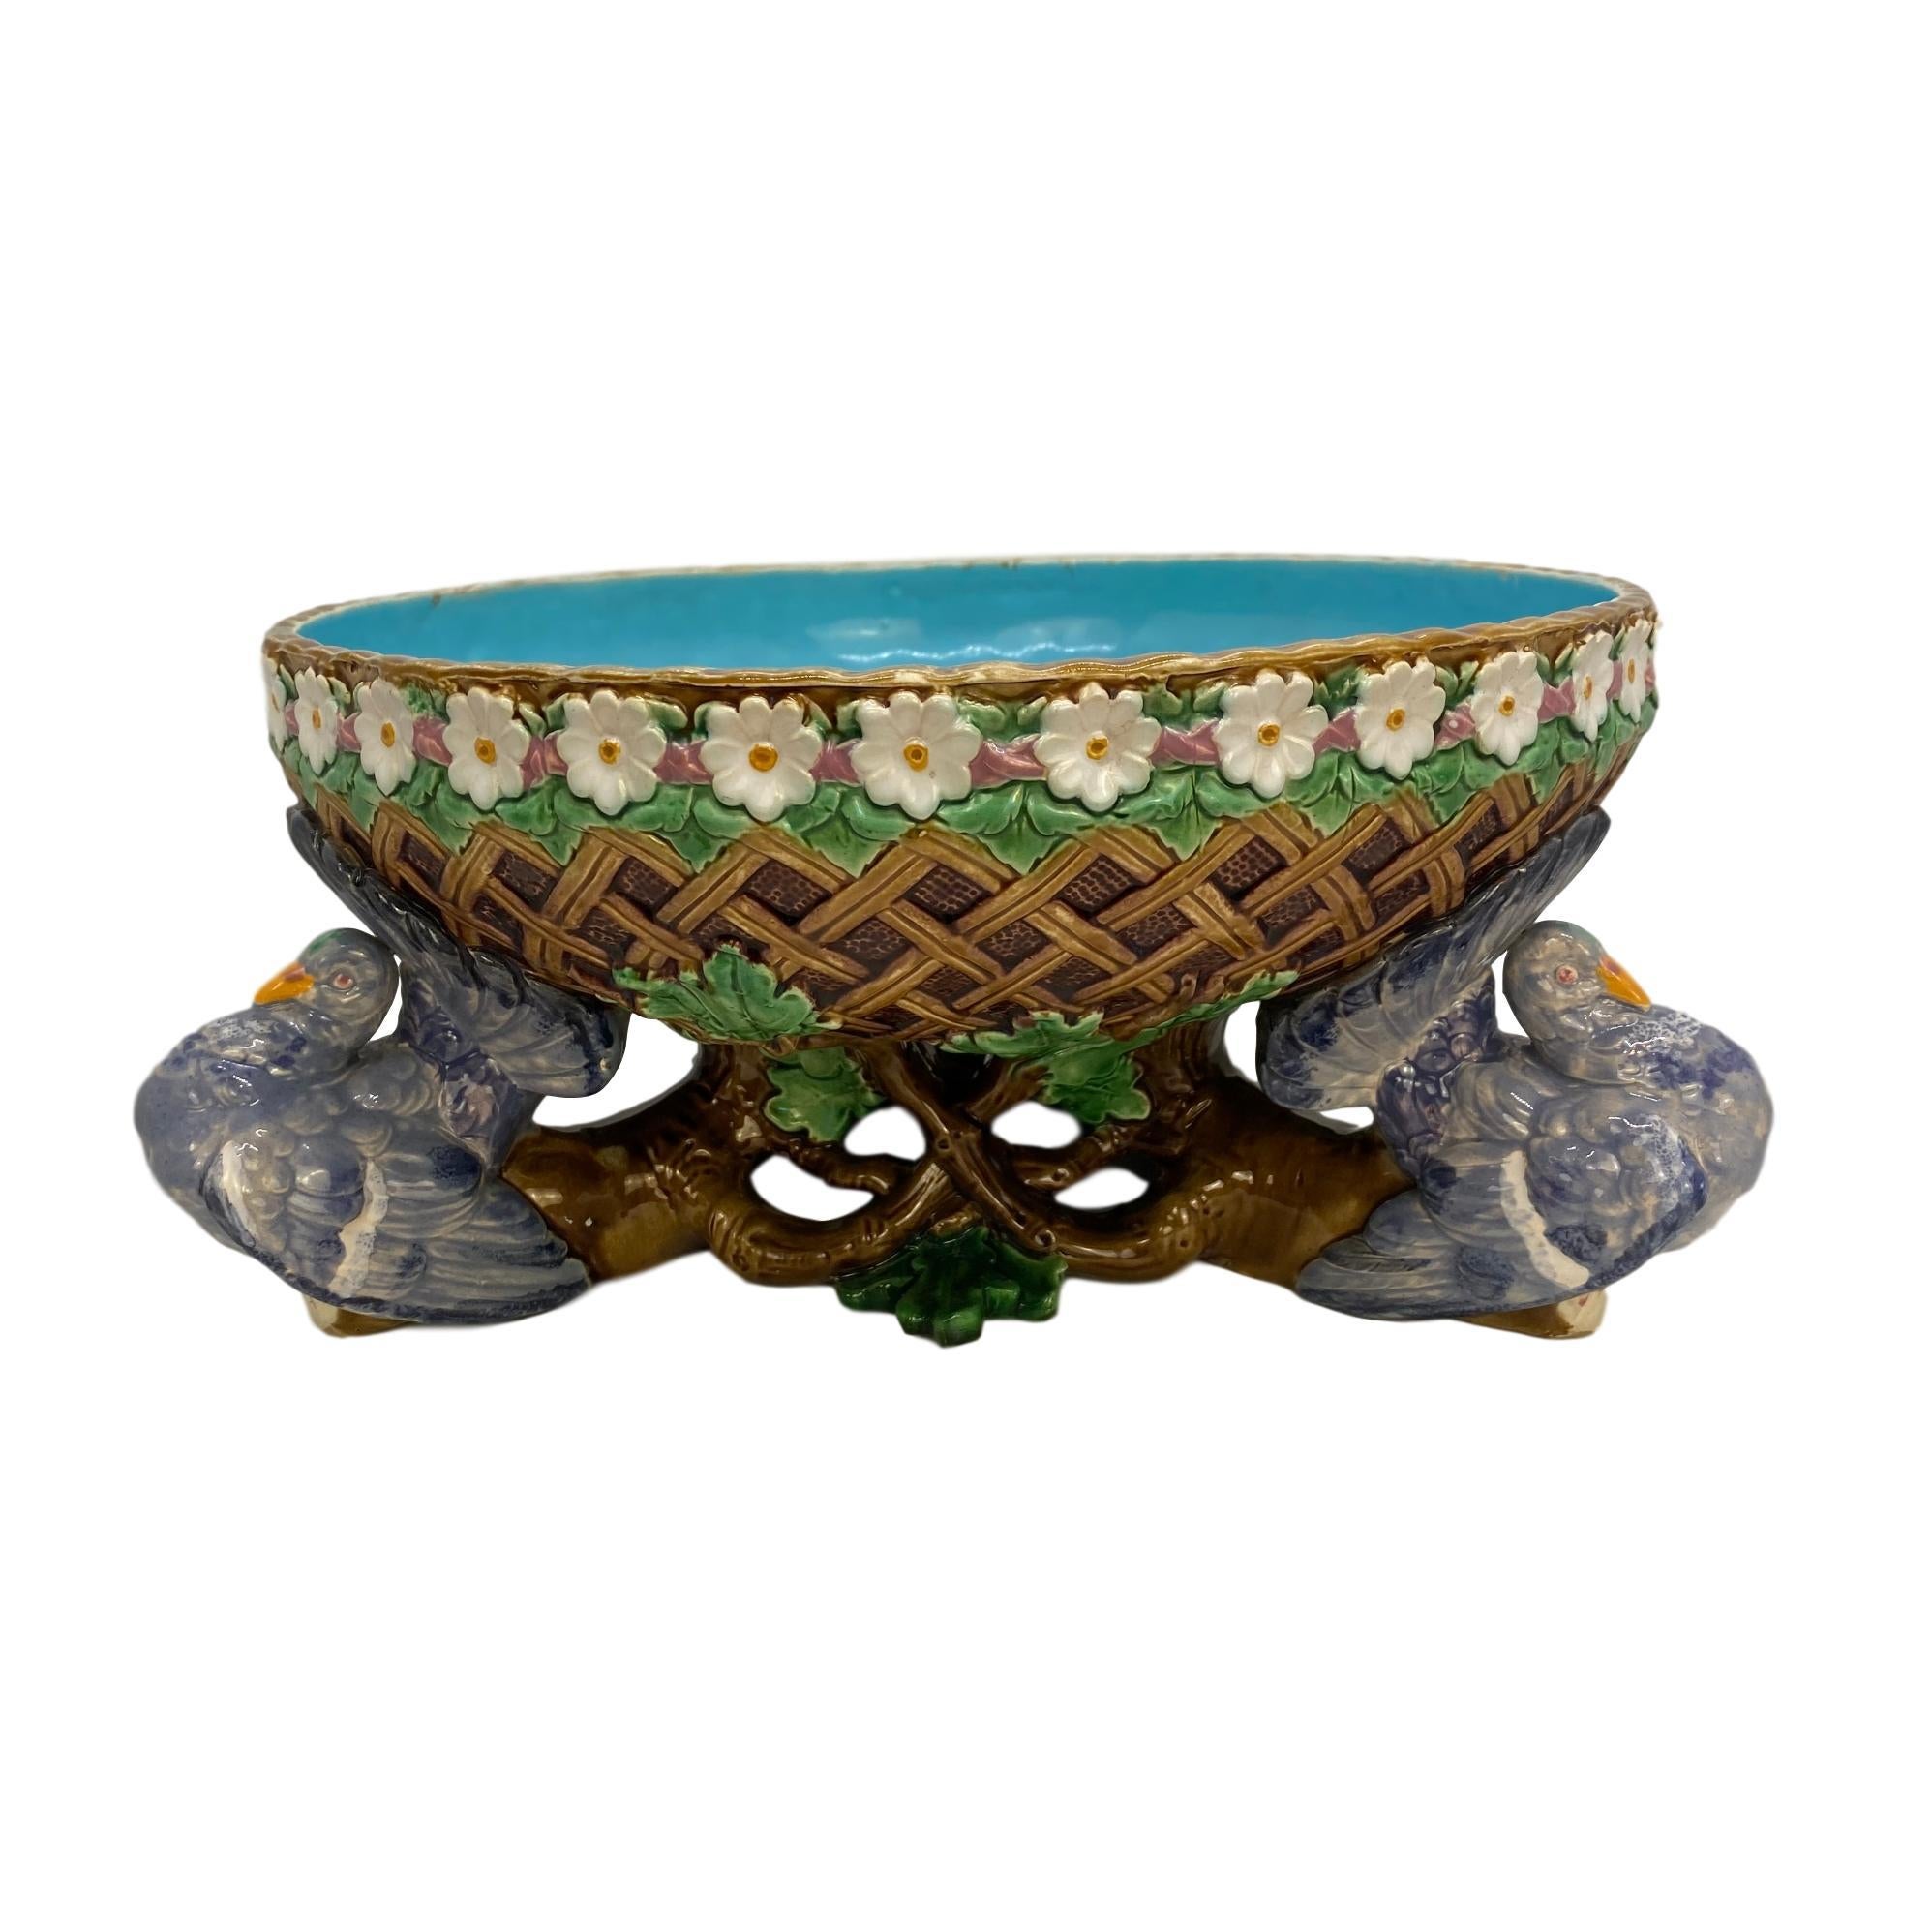 Victorian Minton Majolica Large Fruit Bowl with Three Pigeons Support, English, Dated 1870 For Sale